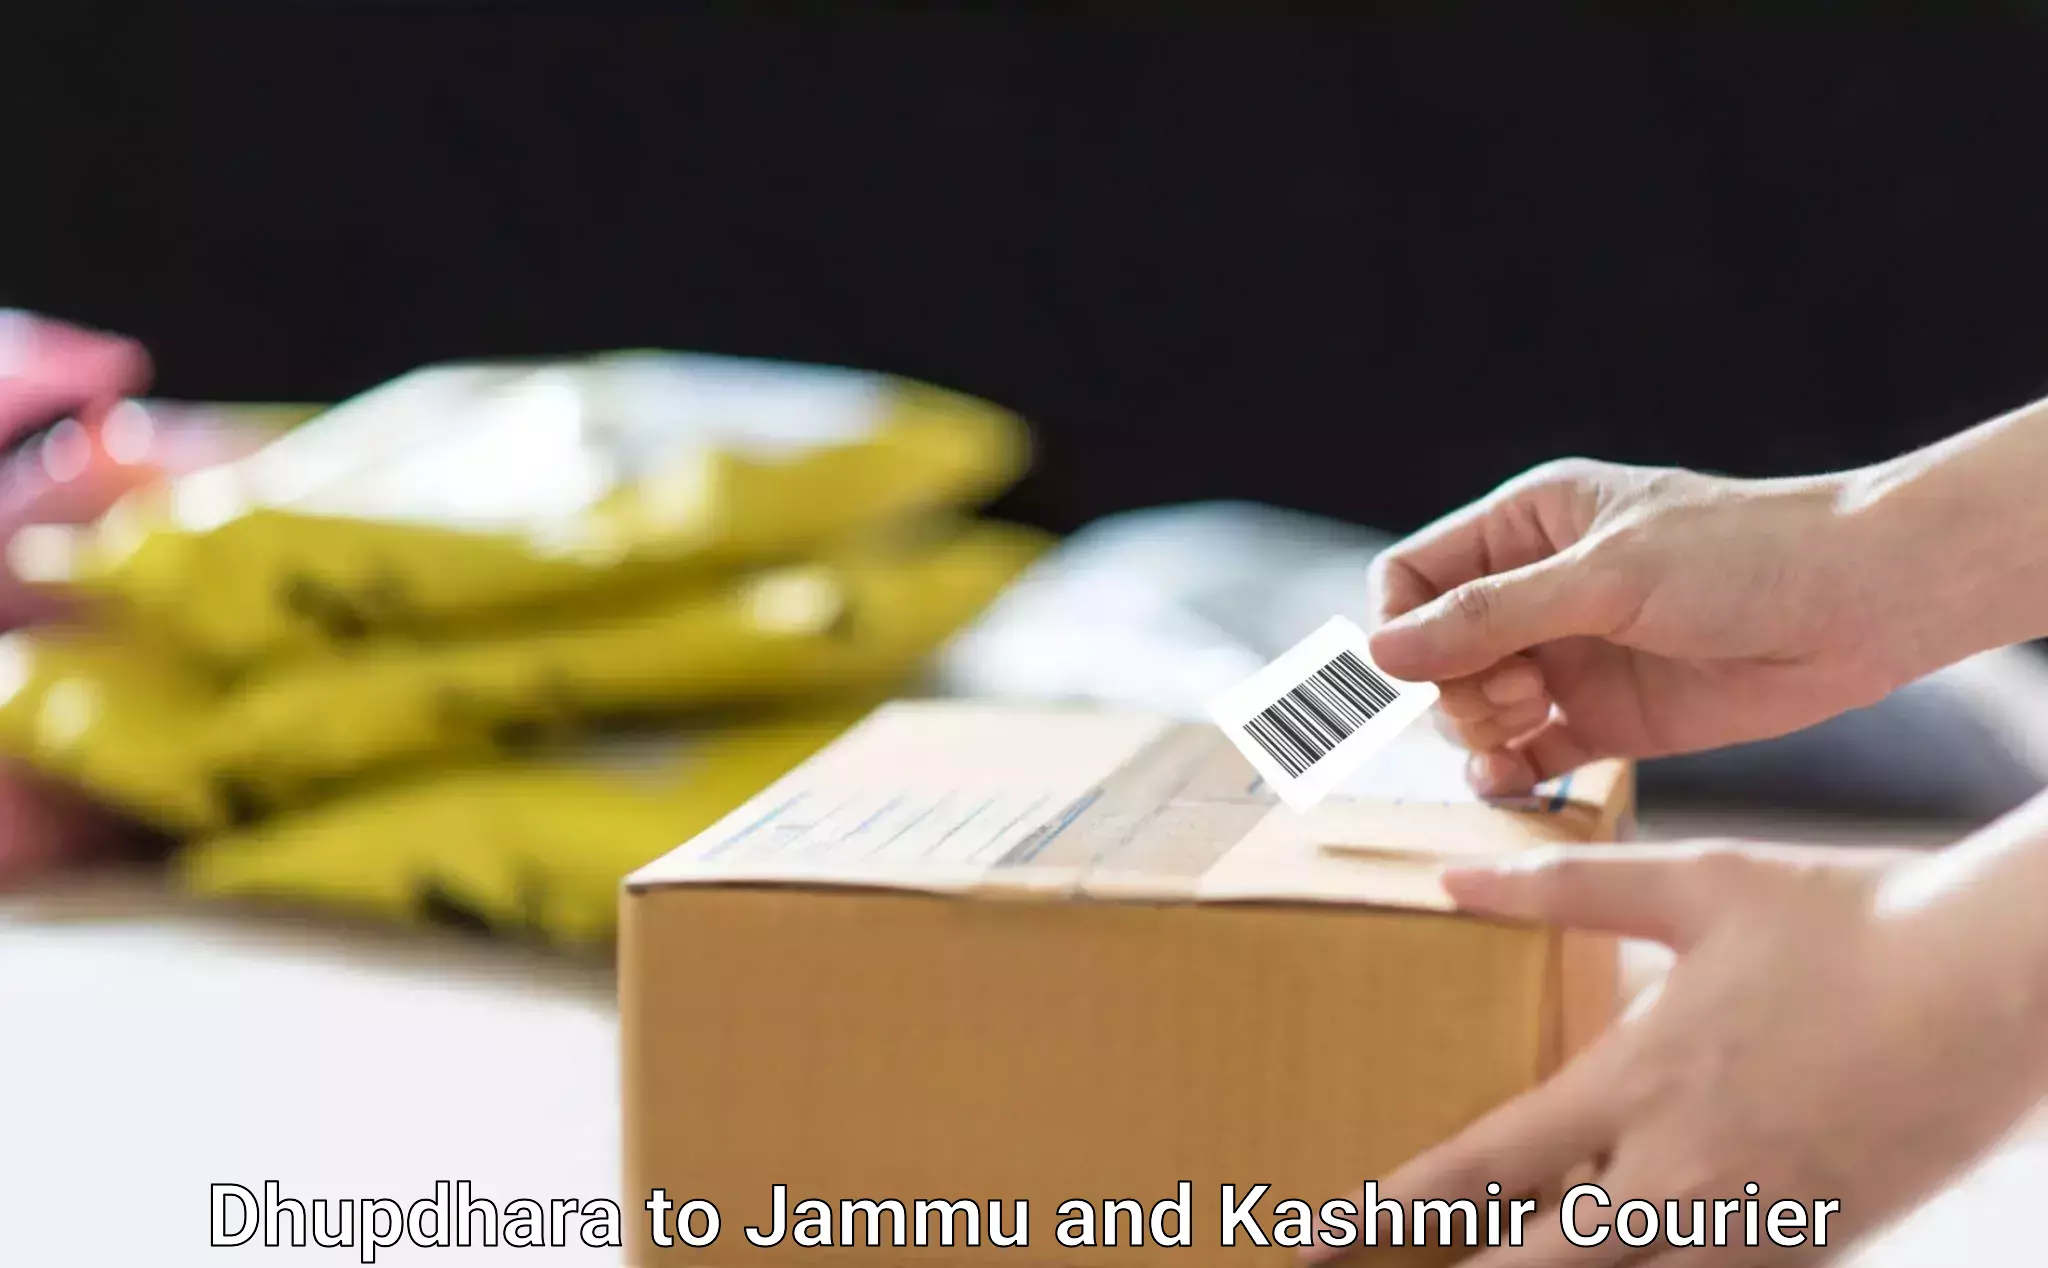 State-of-the-art courier technology Dhupdhara to Kathua